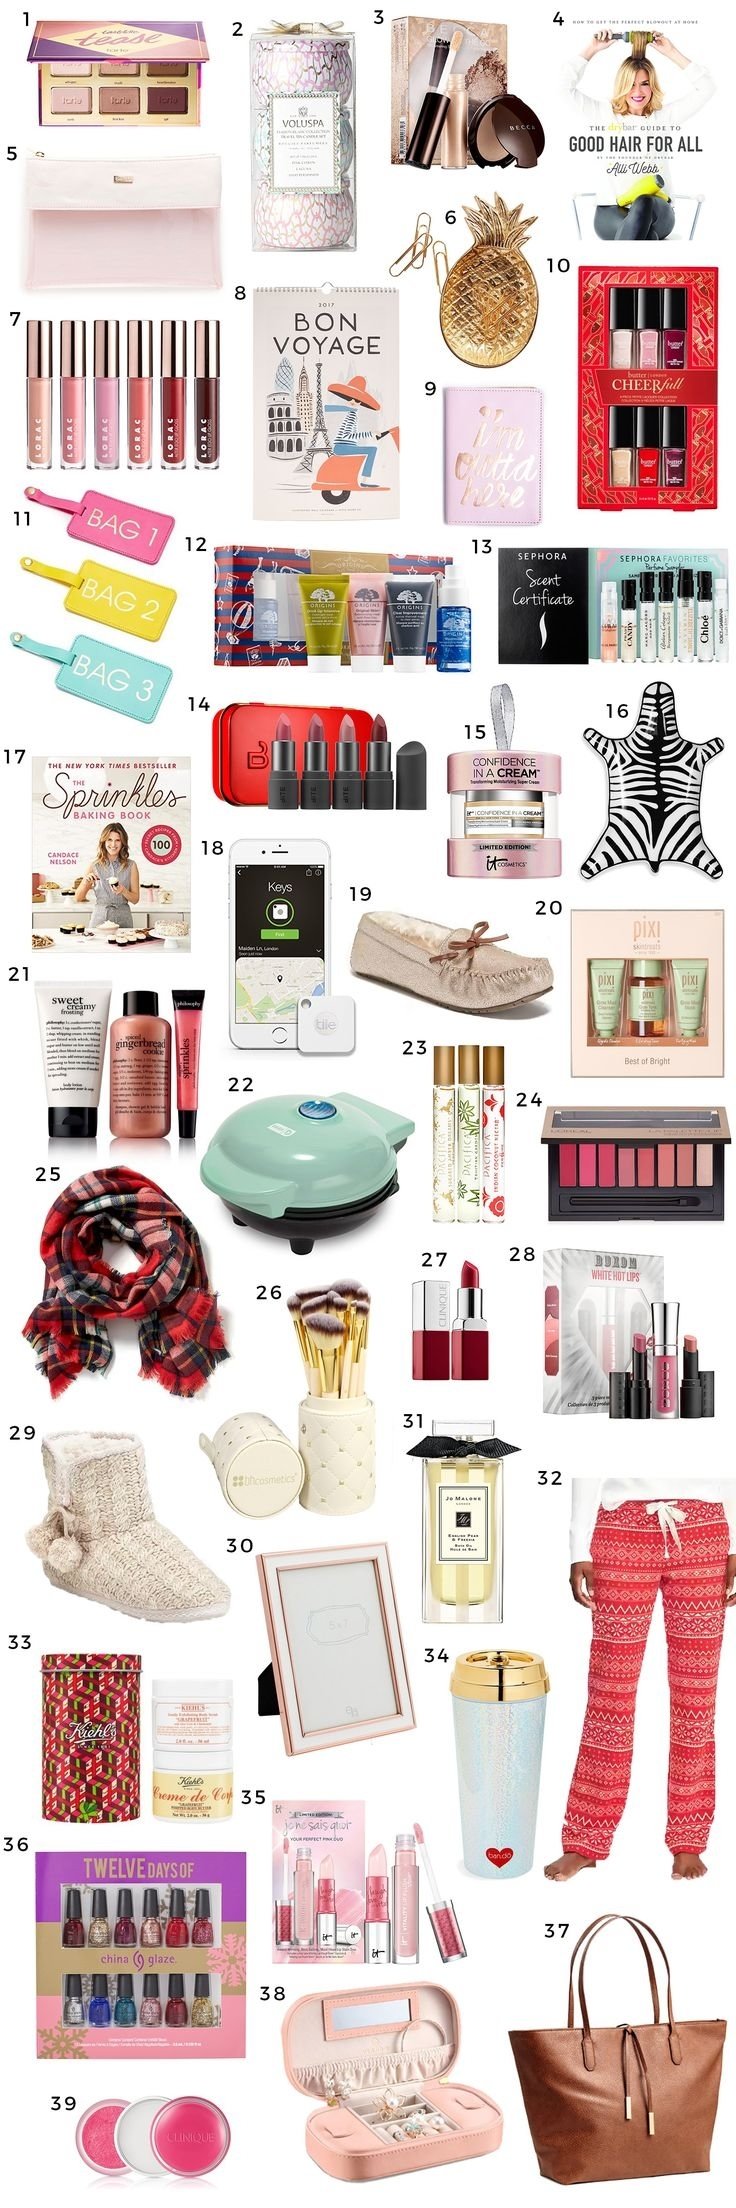 10 Perfect Unique Gift Ideas For Women the best christmas gift ideas for women under 15 ashley brooke 1 2022